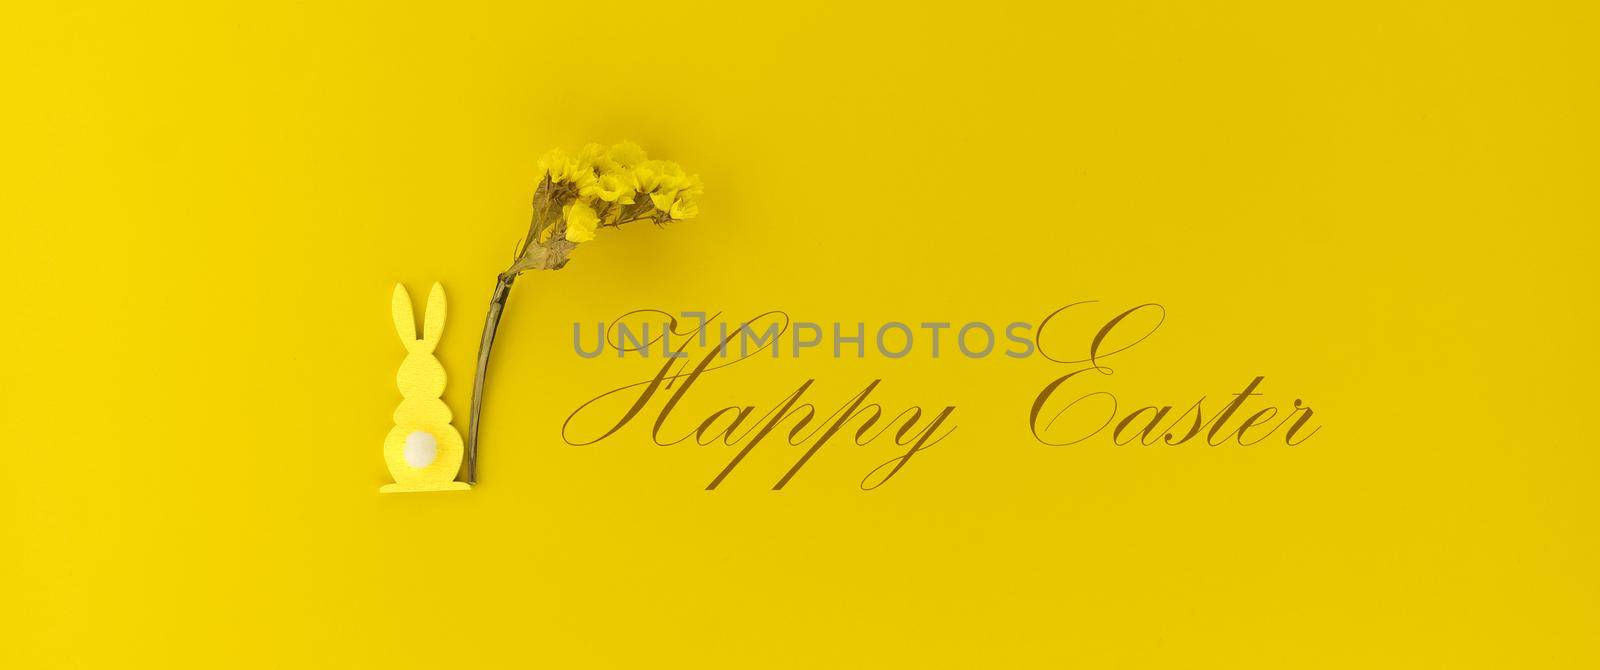 Minimal Easter card or banner with Easter Rabbit figure and flowers on yellow color background with text "Happy Easter"